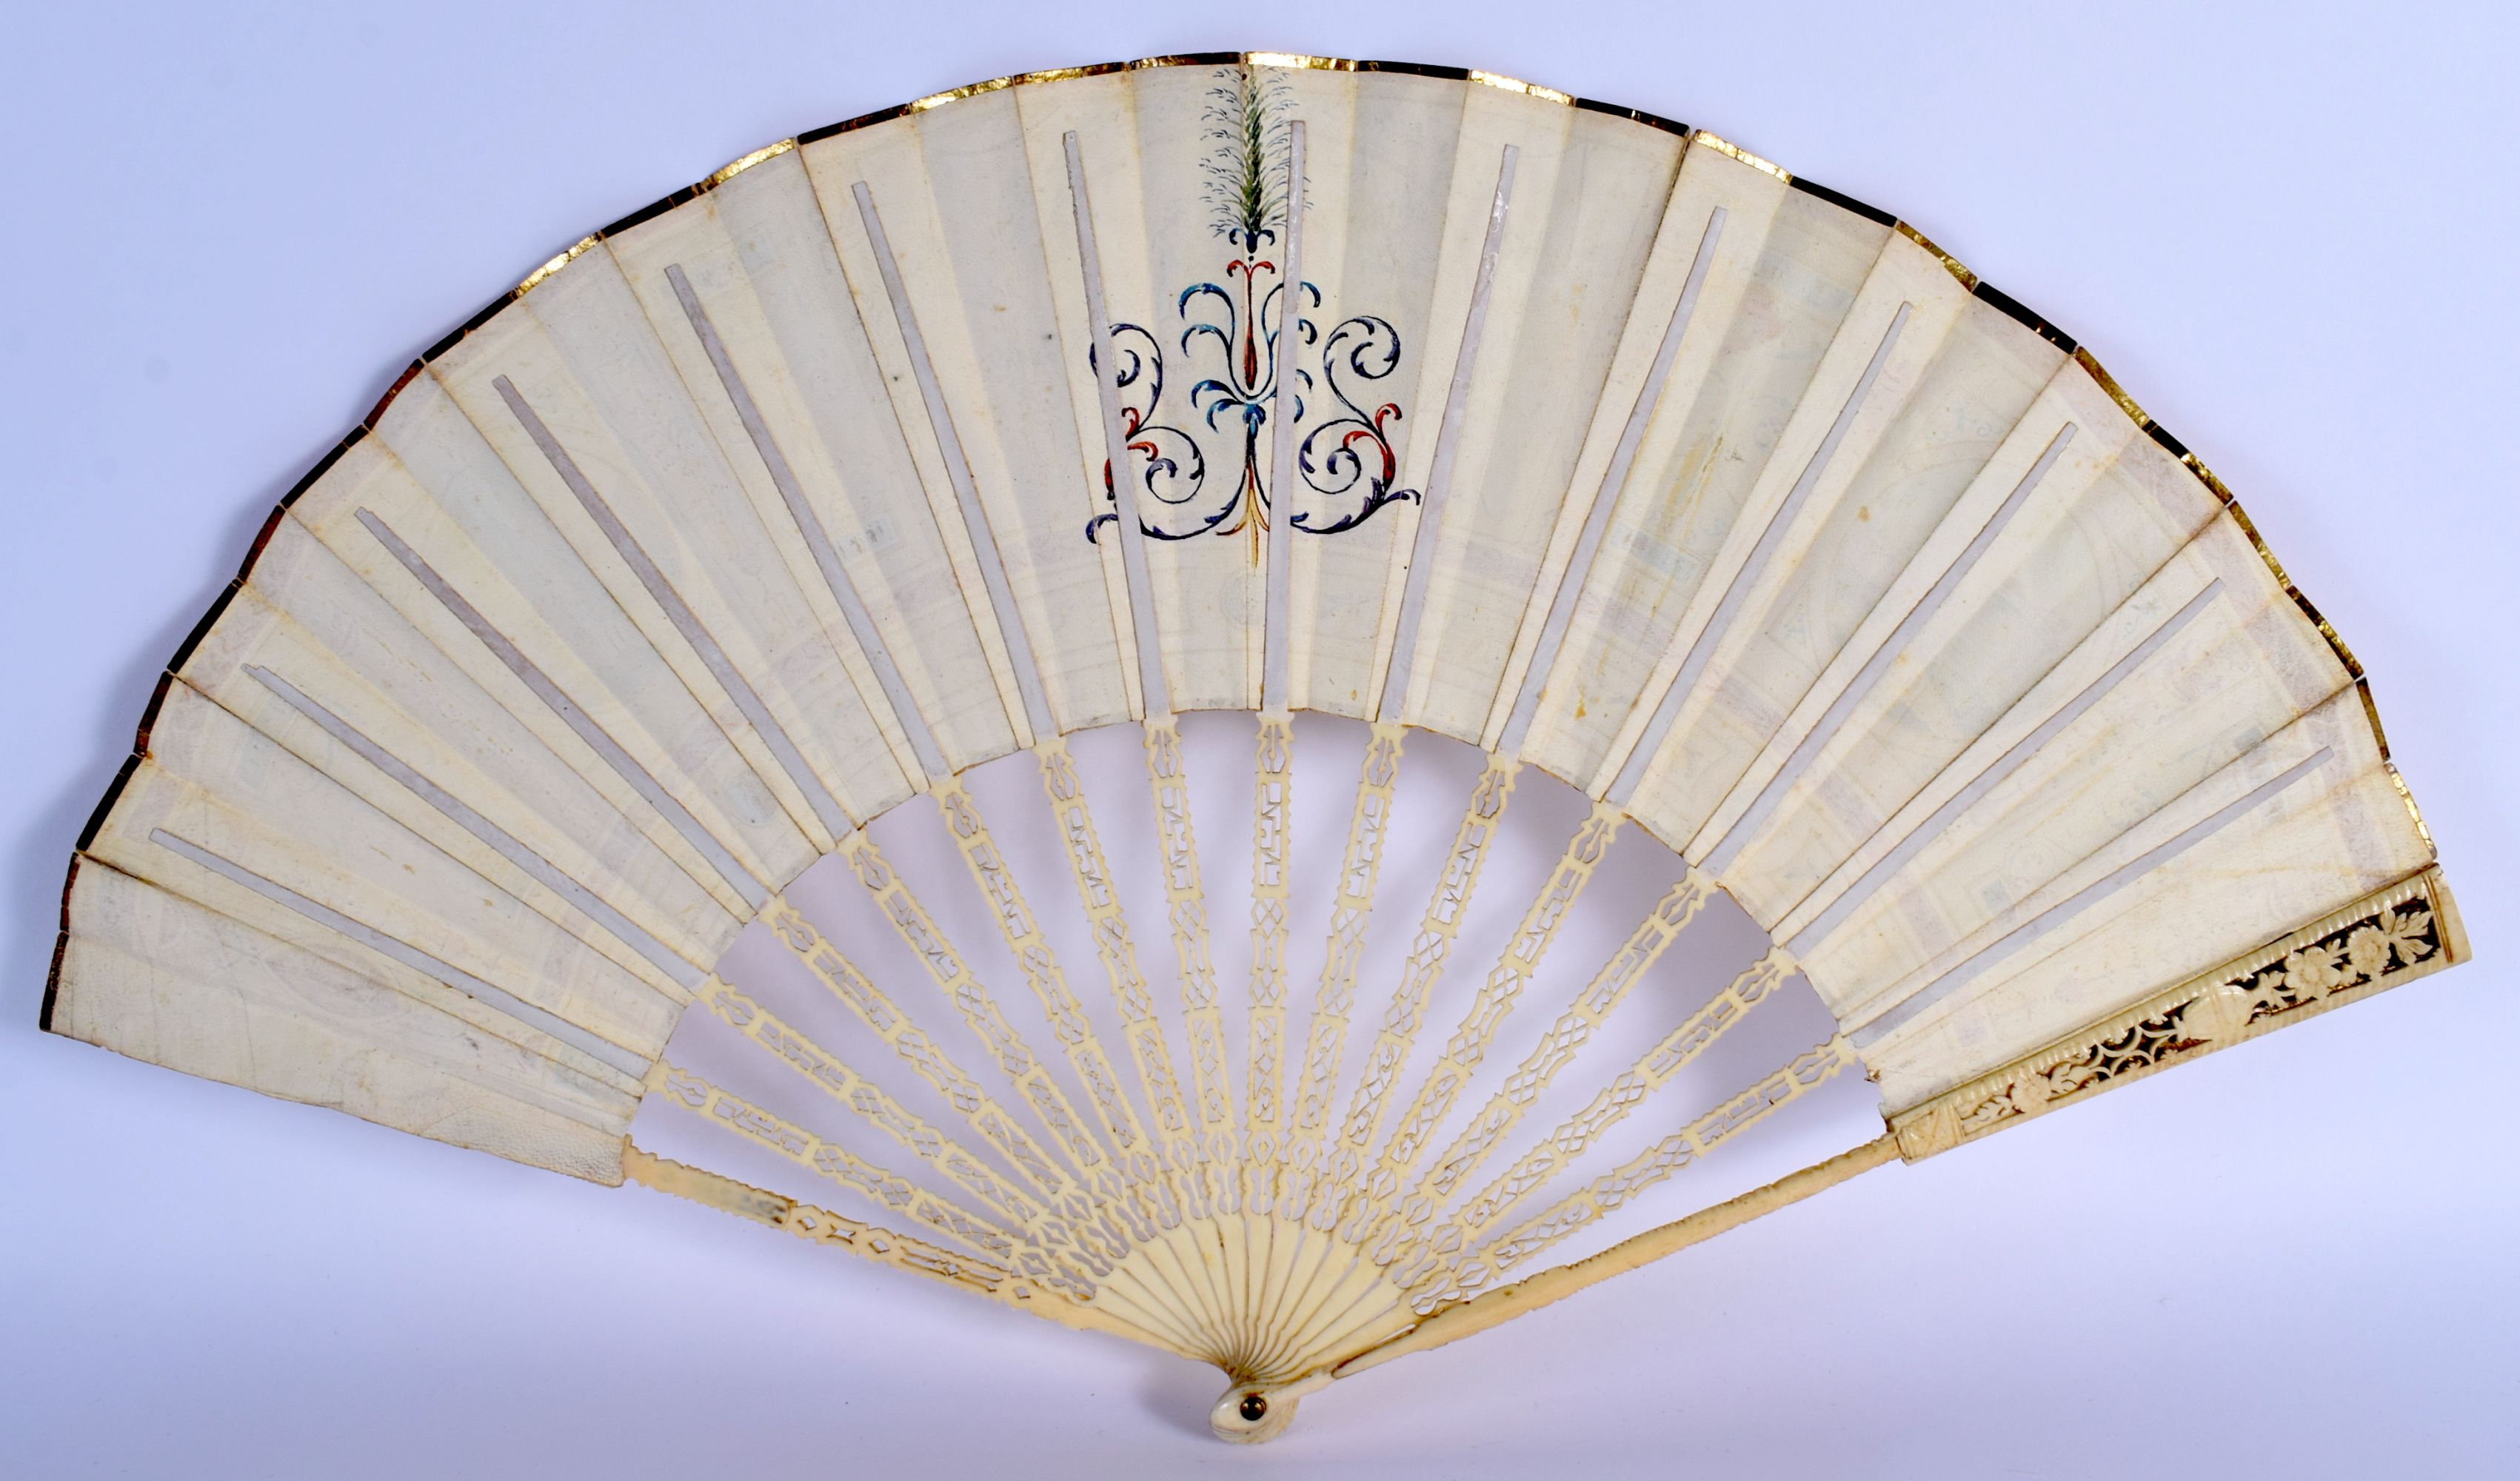 A FINE LATE 18TH CENTURY EUROPEAN GRAND TOUR TYPE FAN with paper leaf supports. 50 cm wide extended. - Image 5 of 5